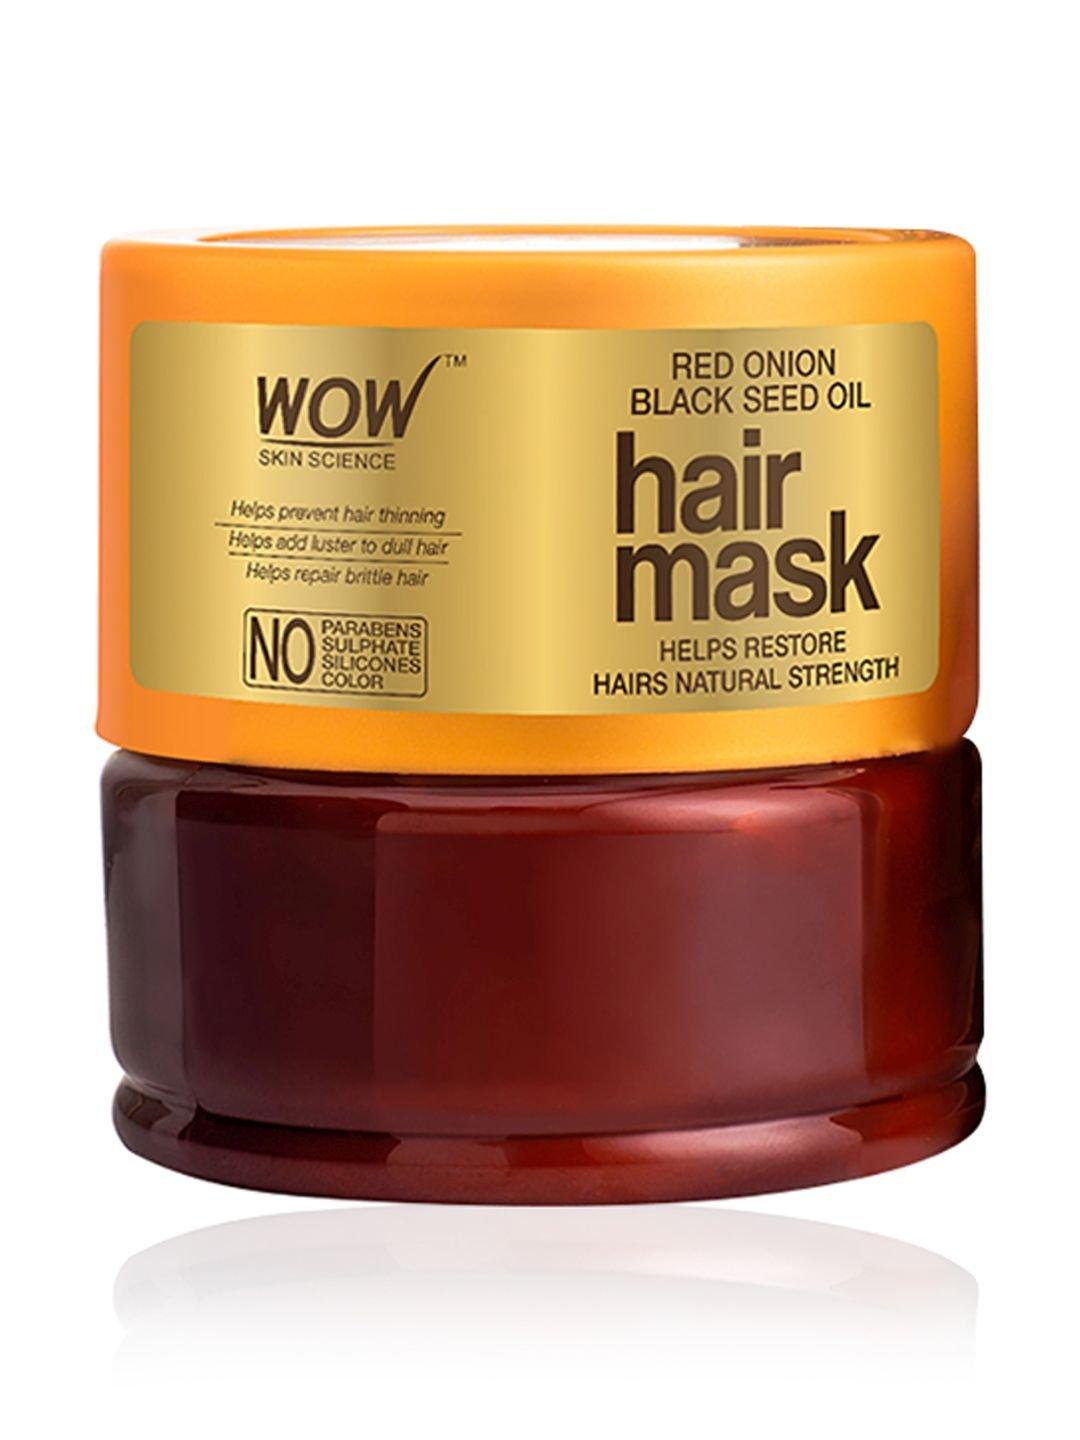 Wow Skin Science Onion Red Seed Oil Hair Mask 200 ml